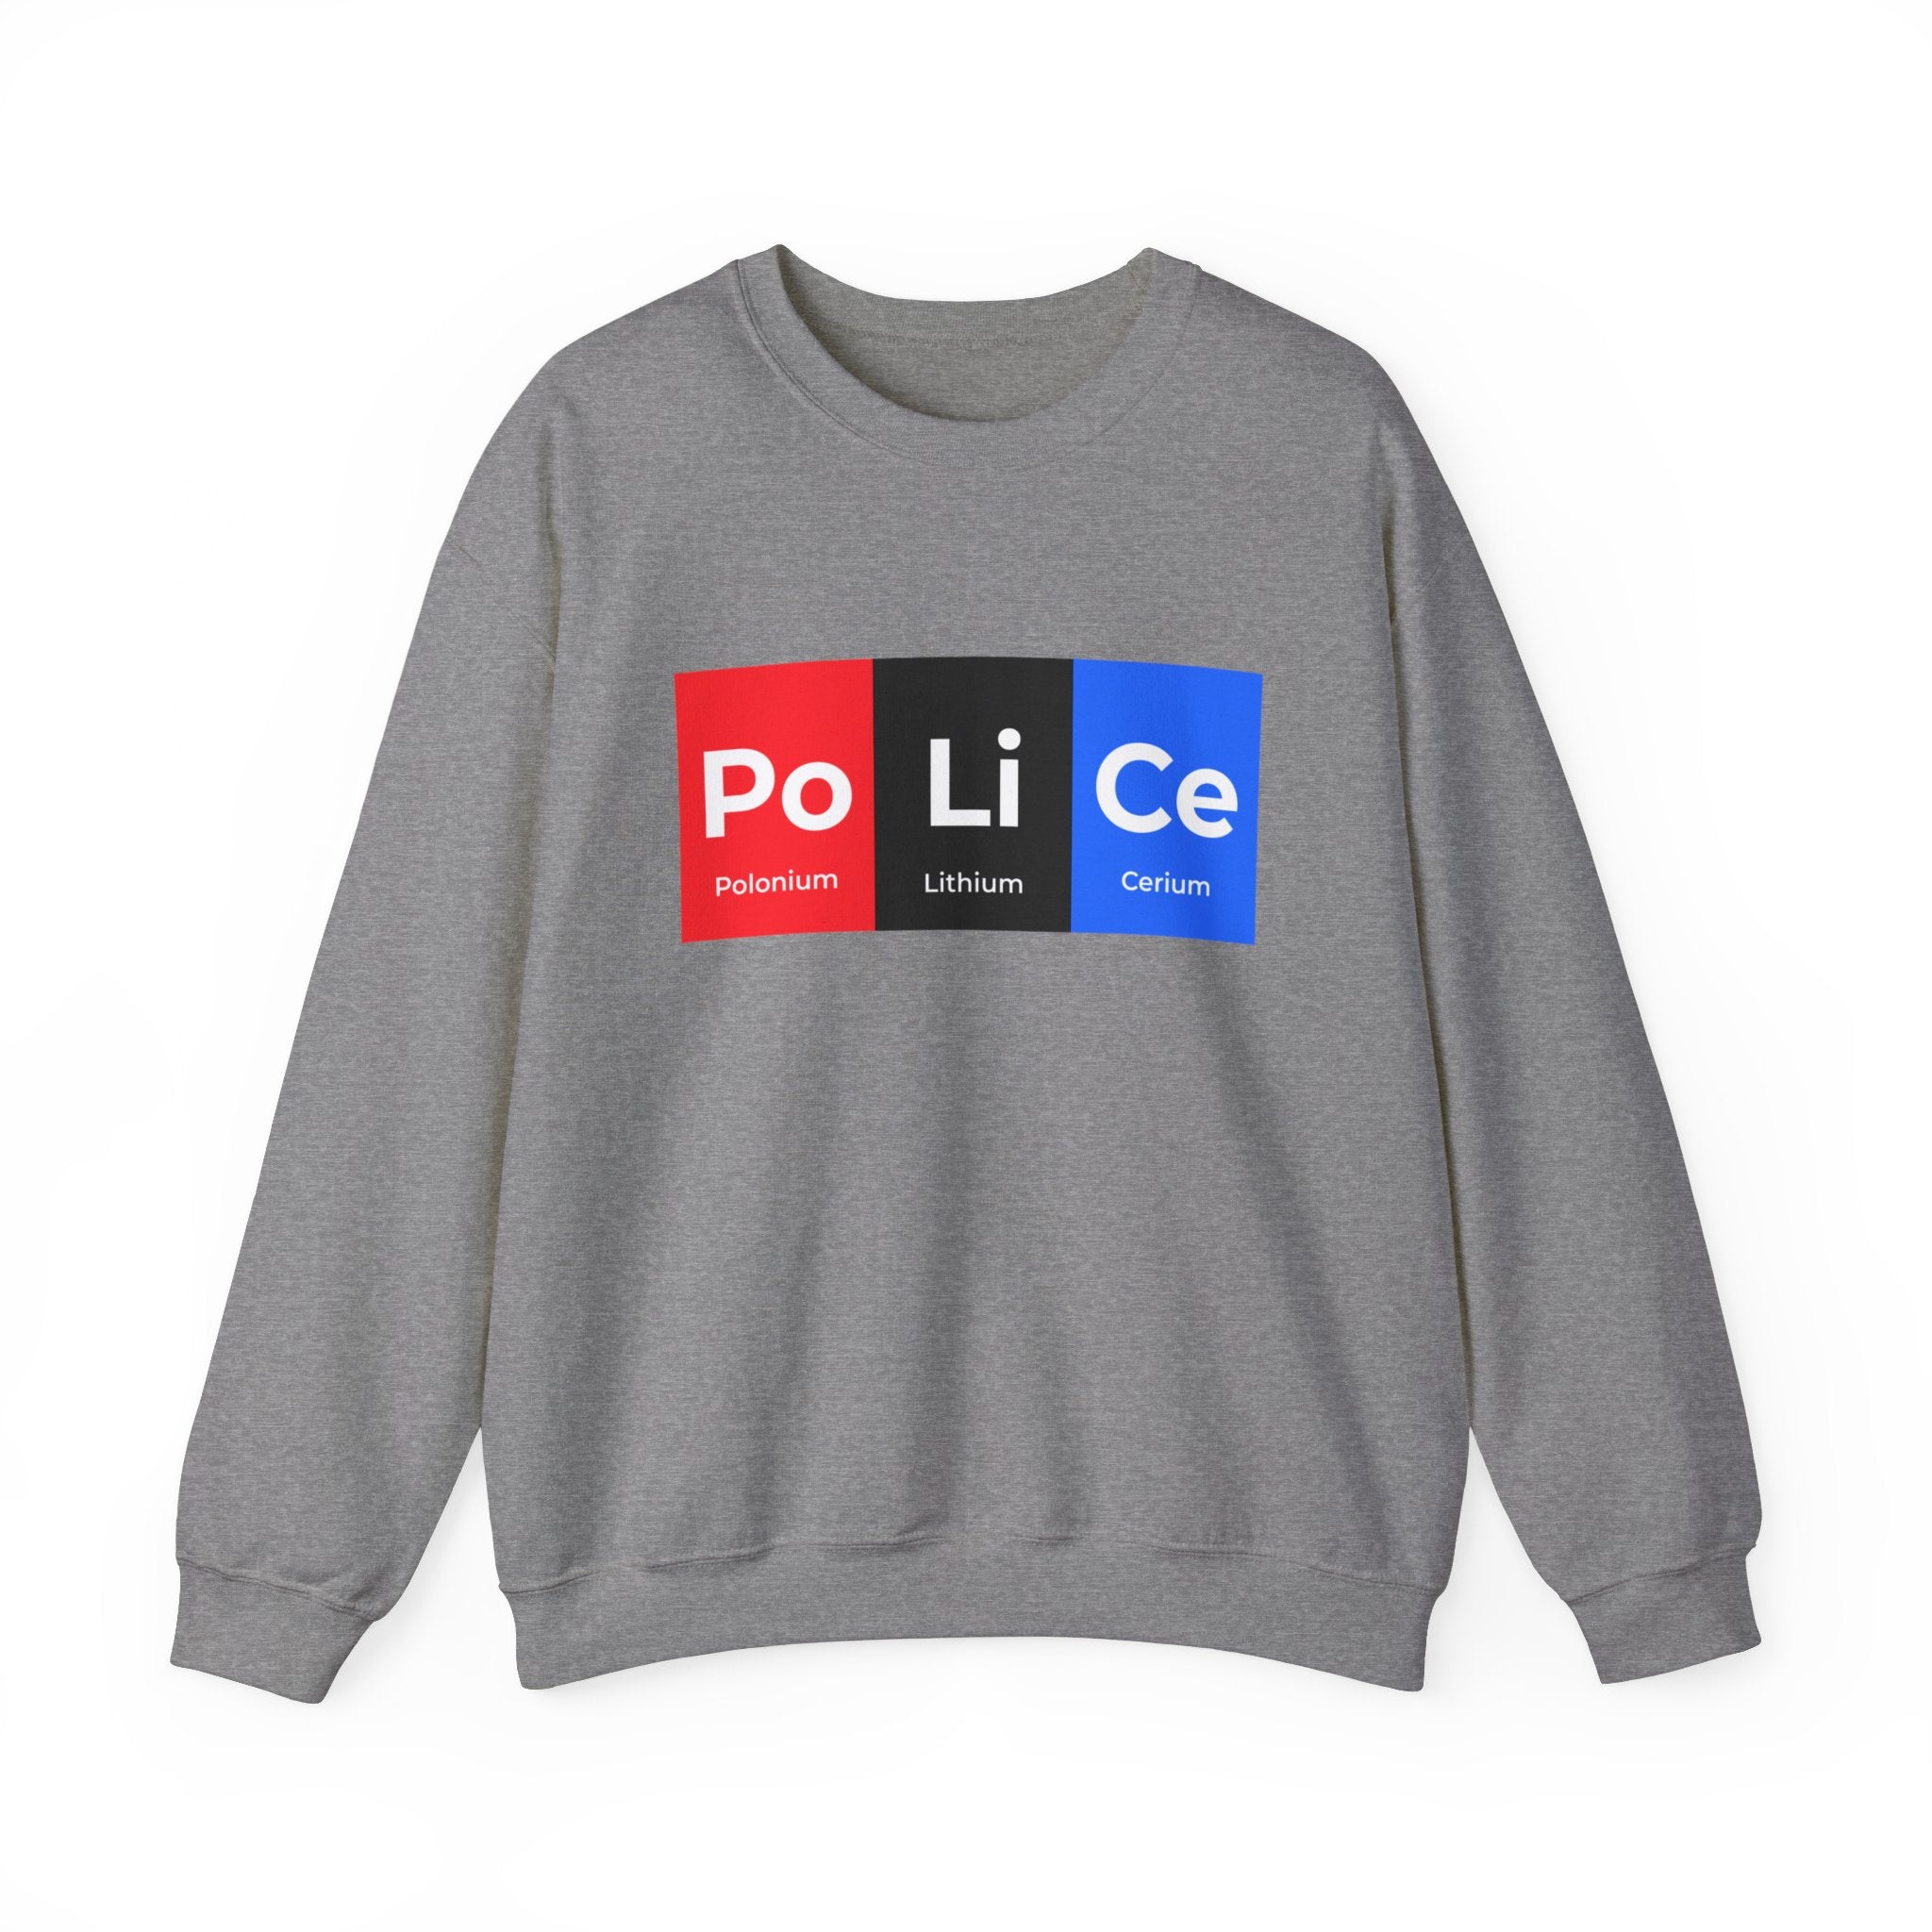 A cozy gray Po-Li-Ce - Sweatshirt featuring a unique design with the word "PoLiCe" using the chemical symbols for Polonium (Po), Lithium (Li), and Cerium (Ce) printed on the front.